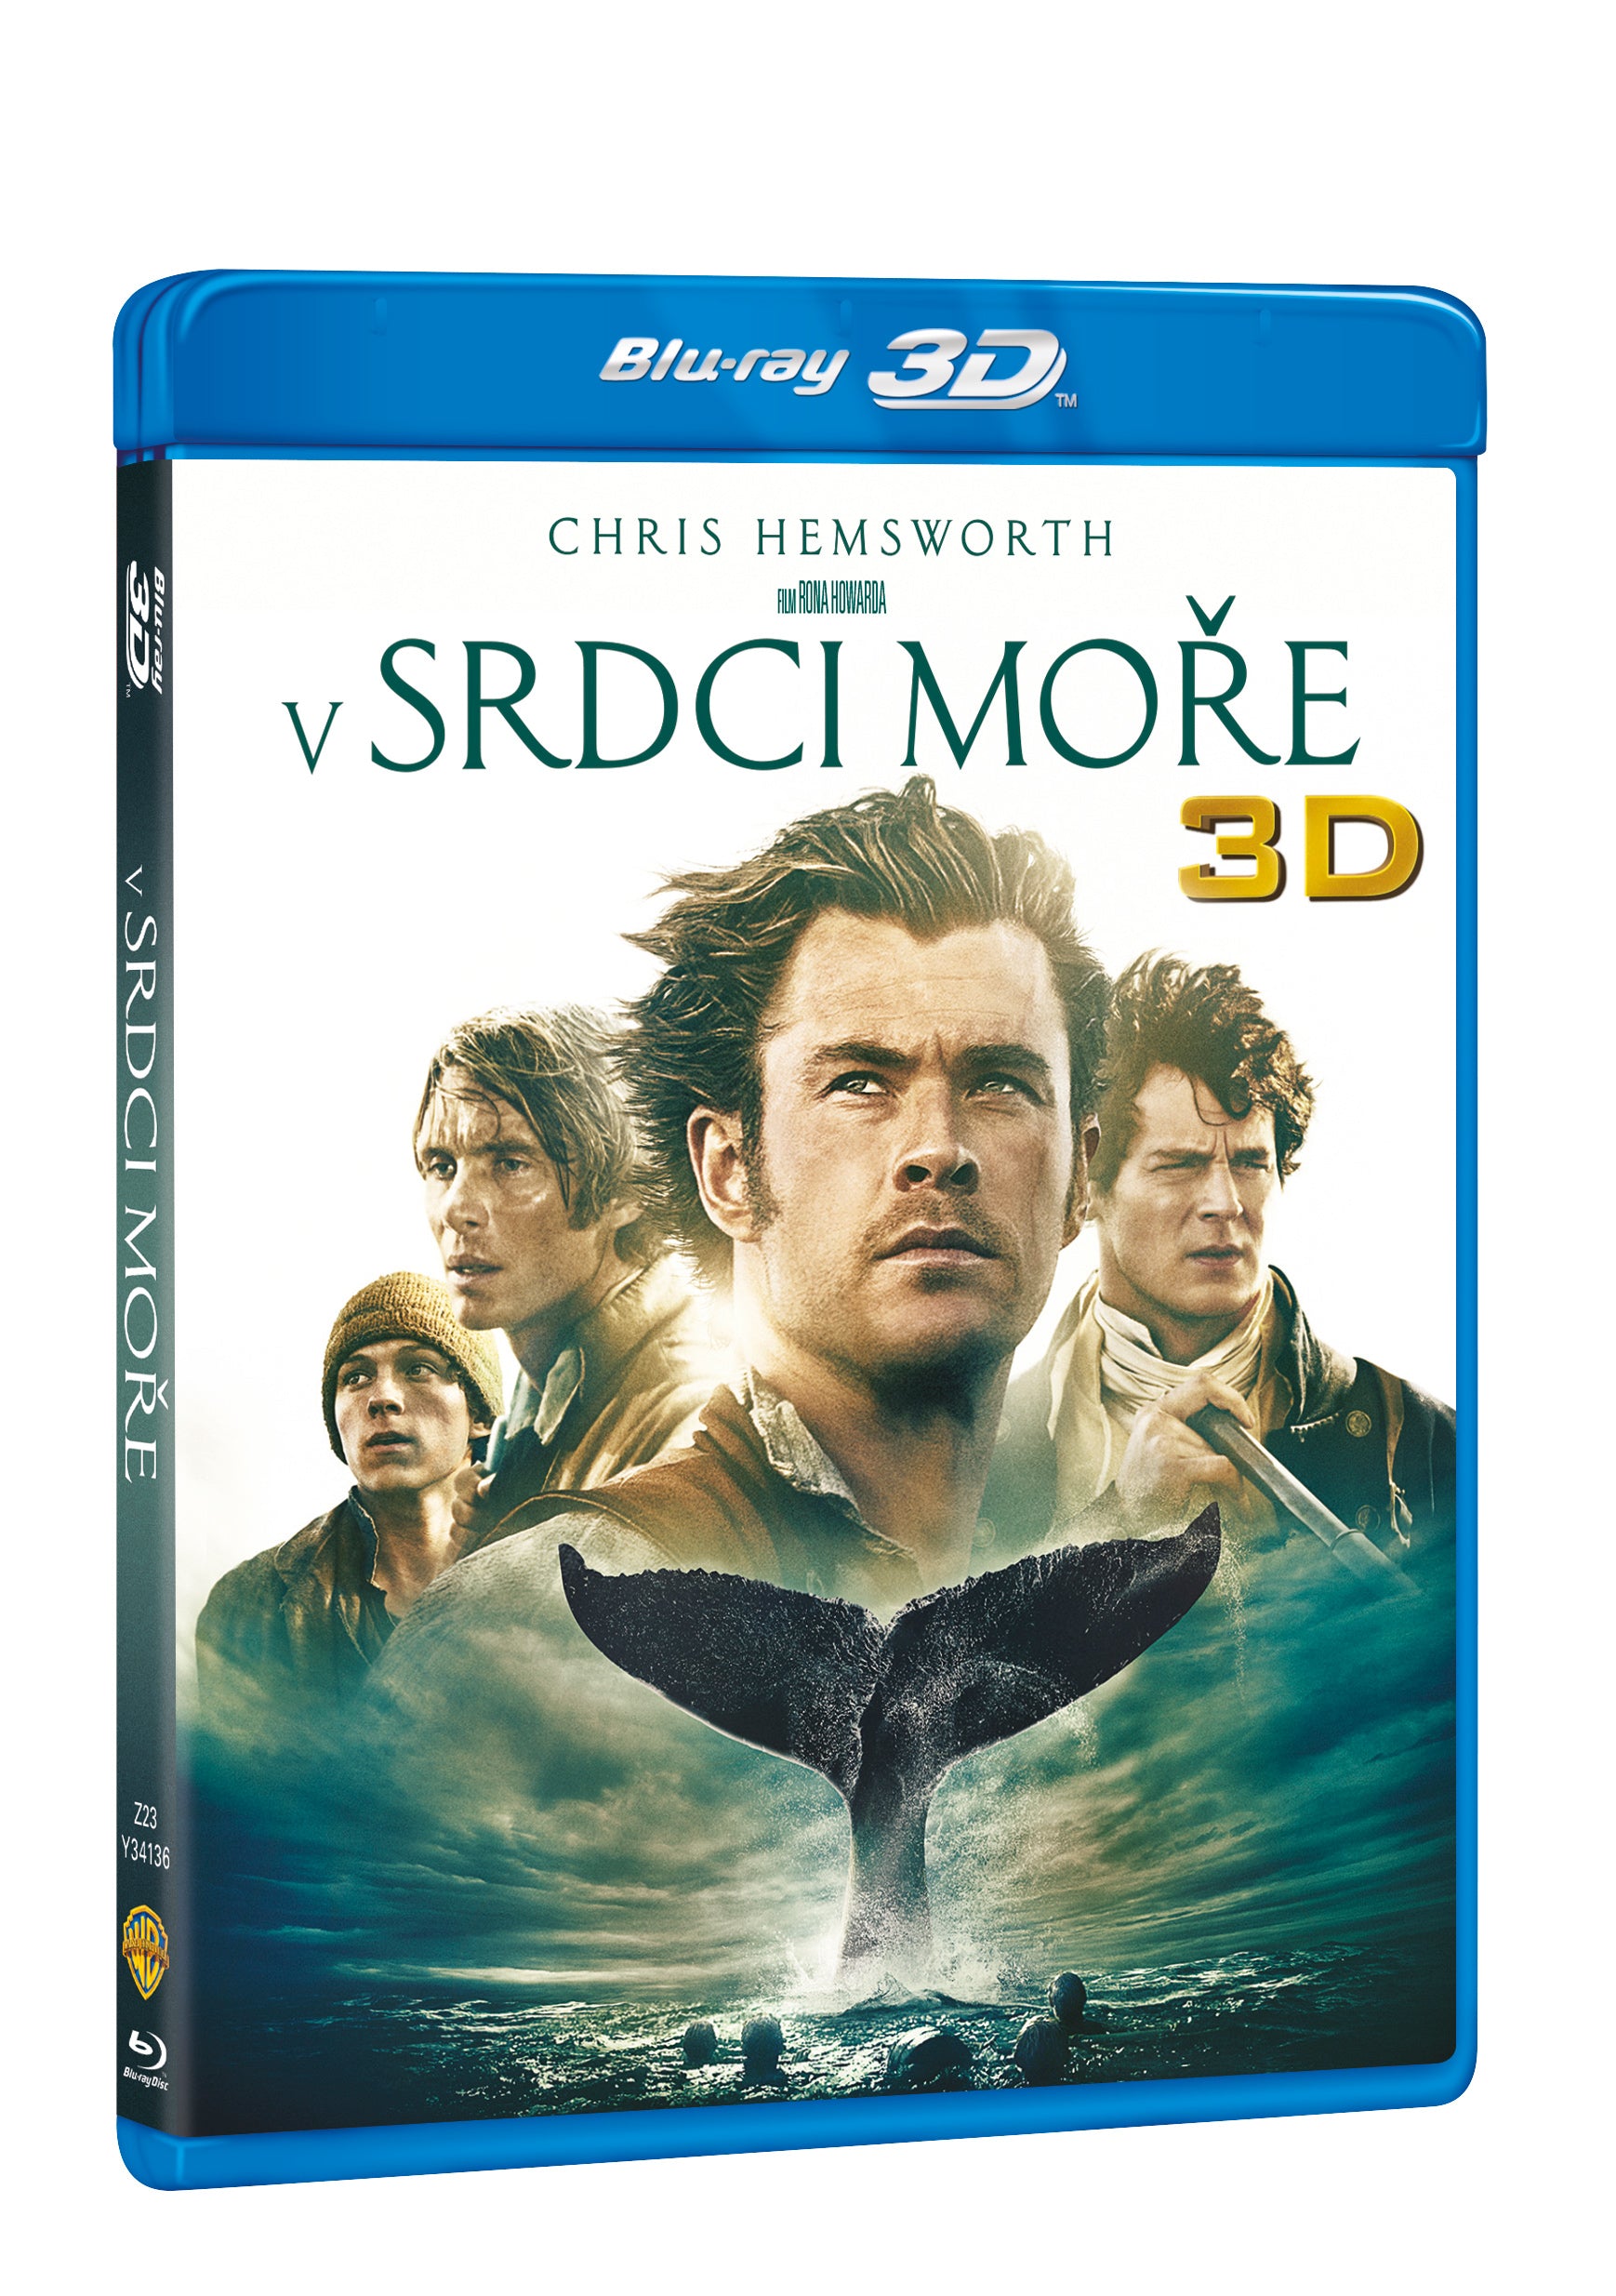 V srdci more 2BD (3D+2D) / In the Heart of the Sea - Czech version